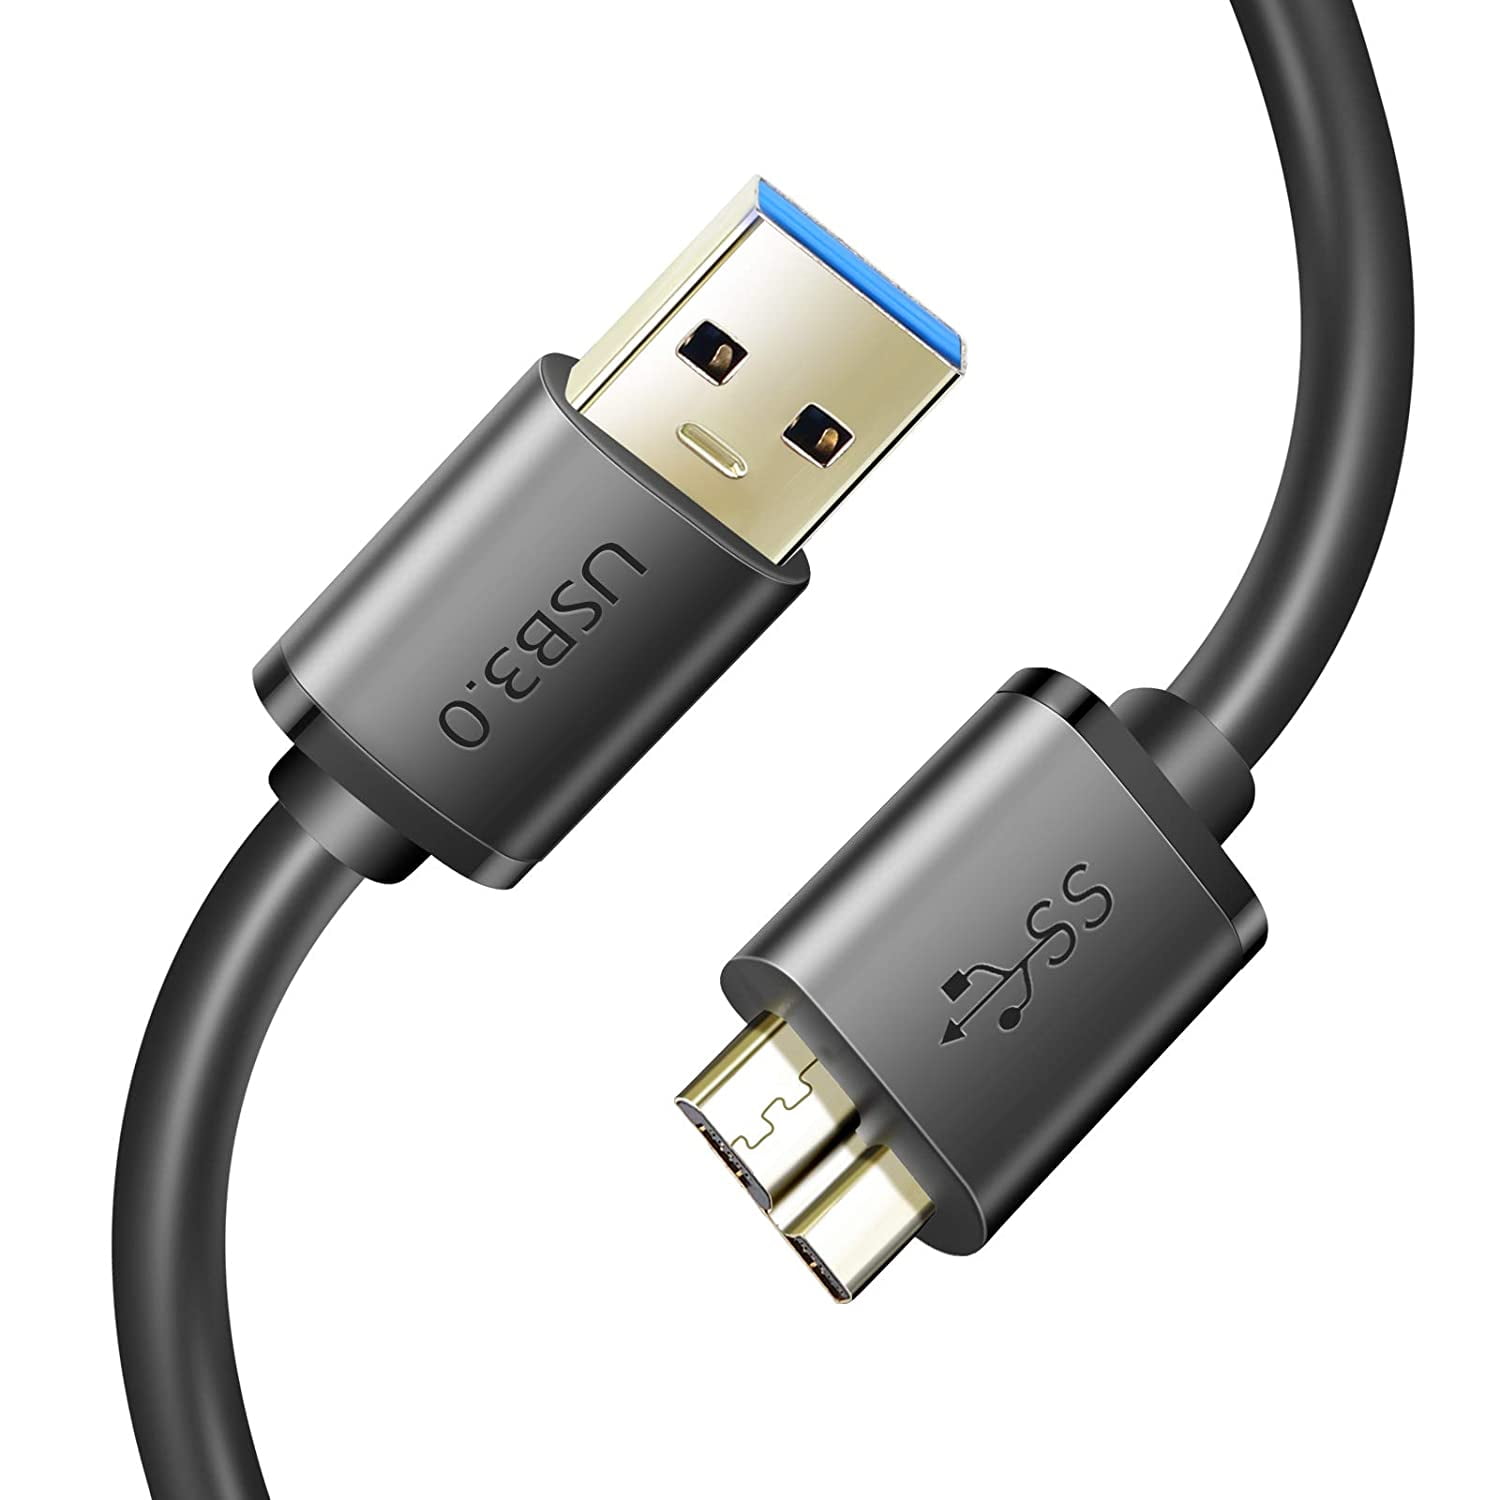 Micro USB 3.0 Cable Hard Drive Cable, USB 3.0 A Male to Micro B Cord Data Wire for Samsung Galaxy Walmart.com